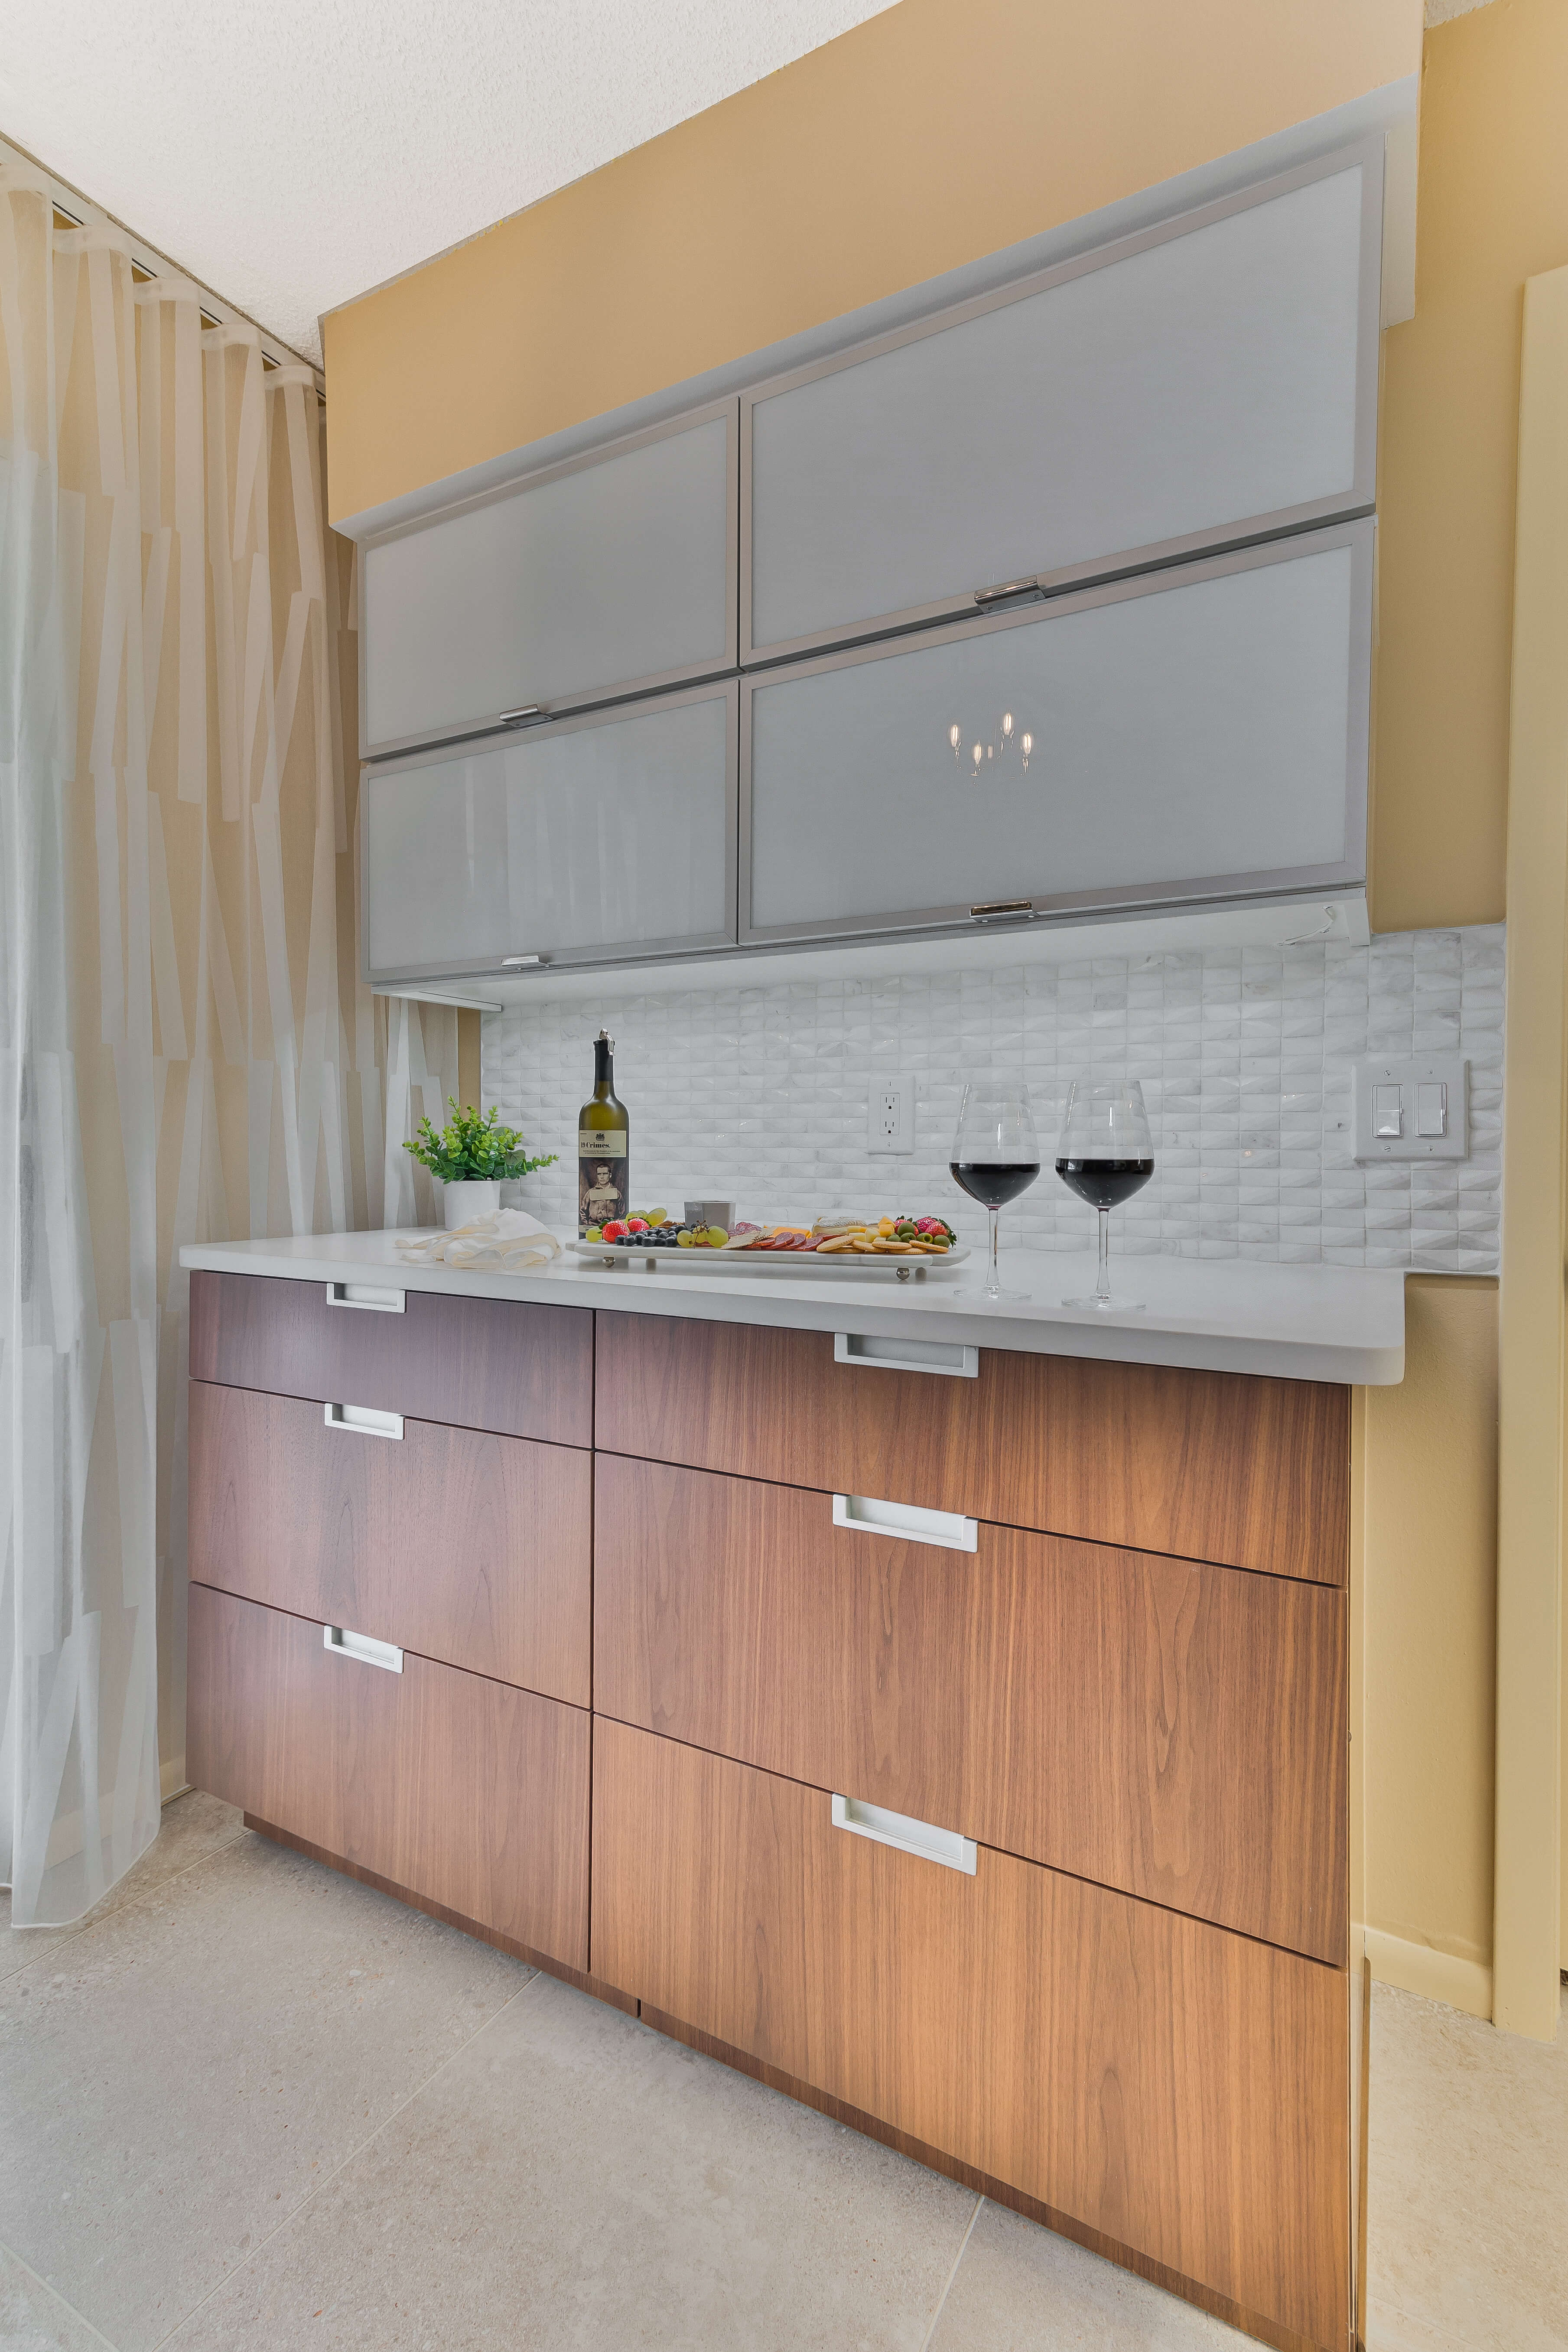 A beverage center in a Mid-Century Modern styled kitchen featuring wood slab cabinet doors with integrated hardware pulls paired with contemporary aluminum framed accent doors.